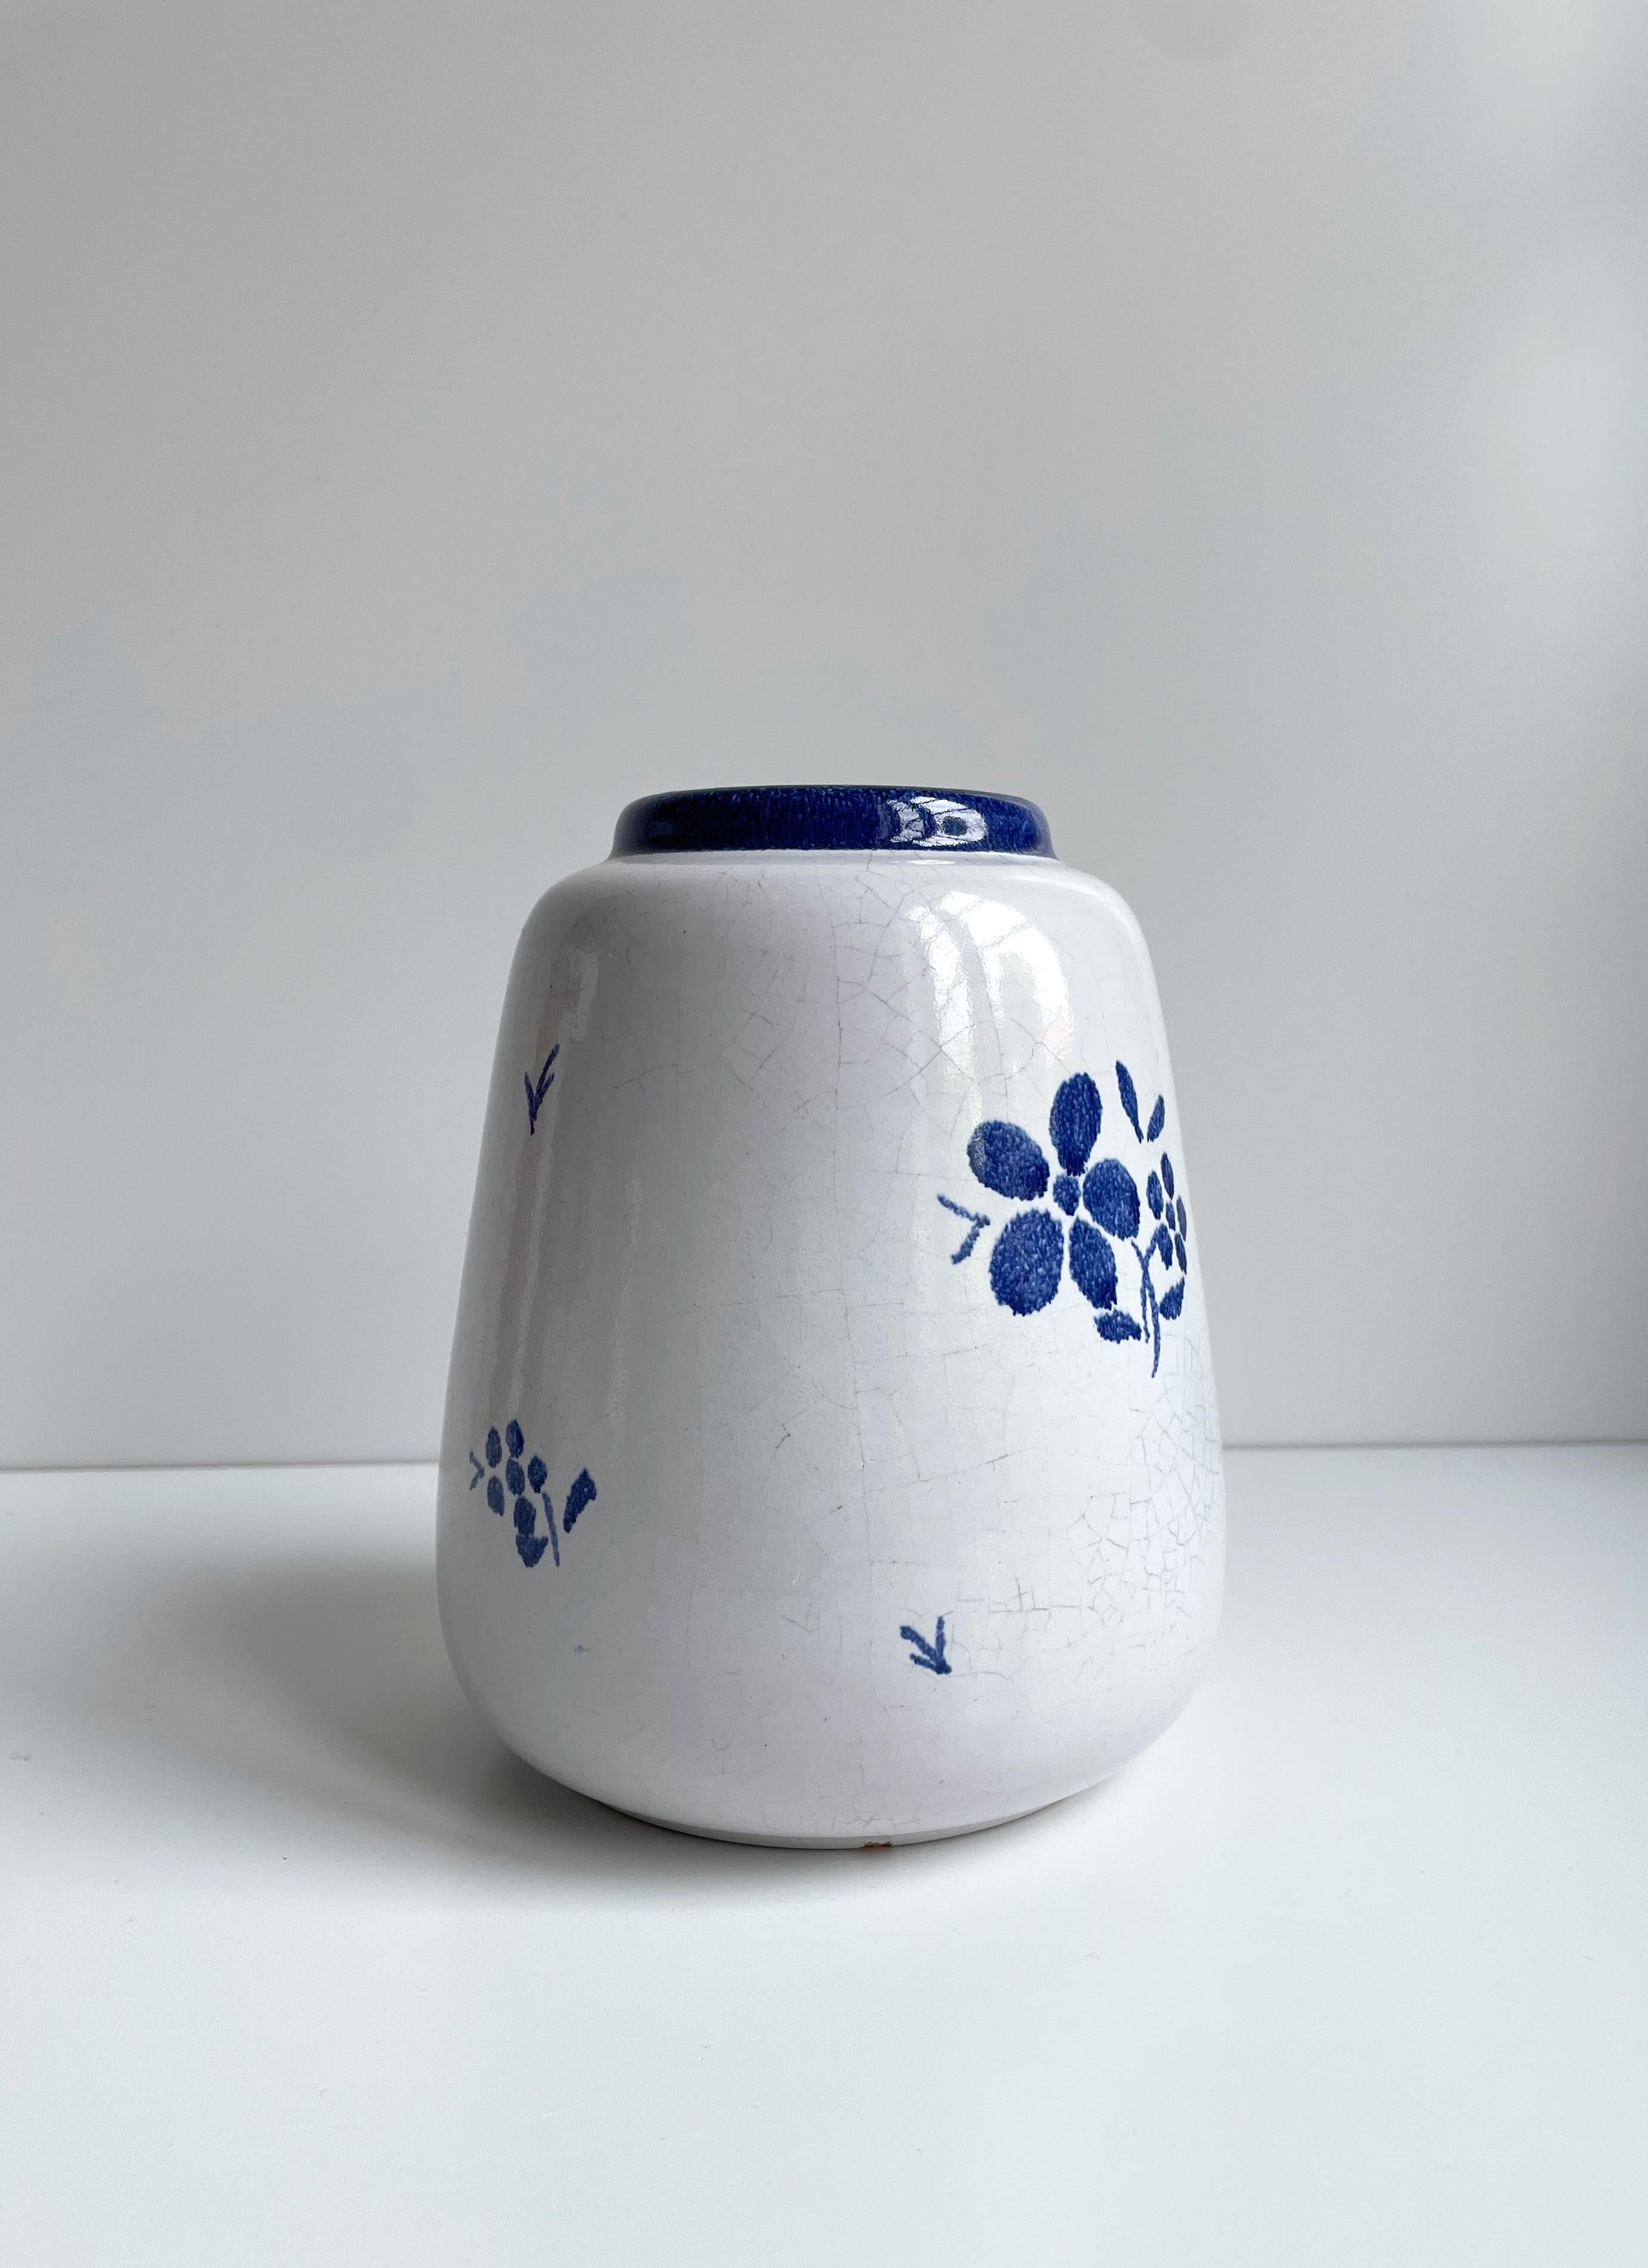 Pretty Nordic almue style ceramic vase with hand-painted admiral blue floral decor on white crackle glaze. Manufactured by Søholm on the Danish island of Bornholm in the early 1940s. Signed under base. Great vintage condition consistent with